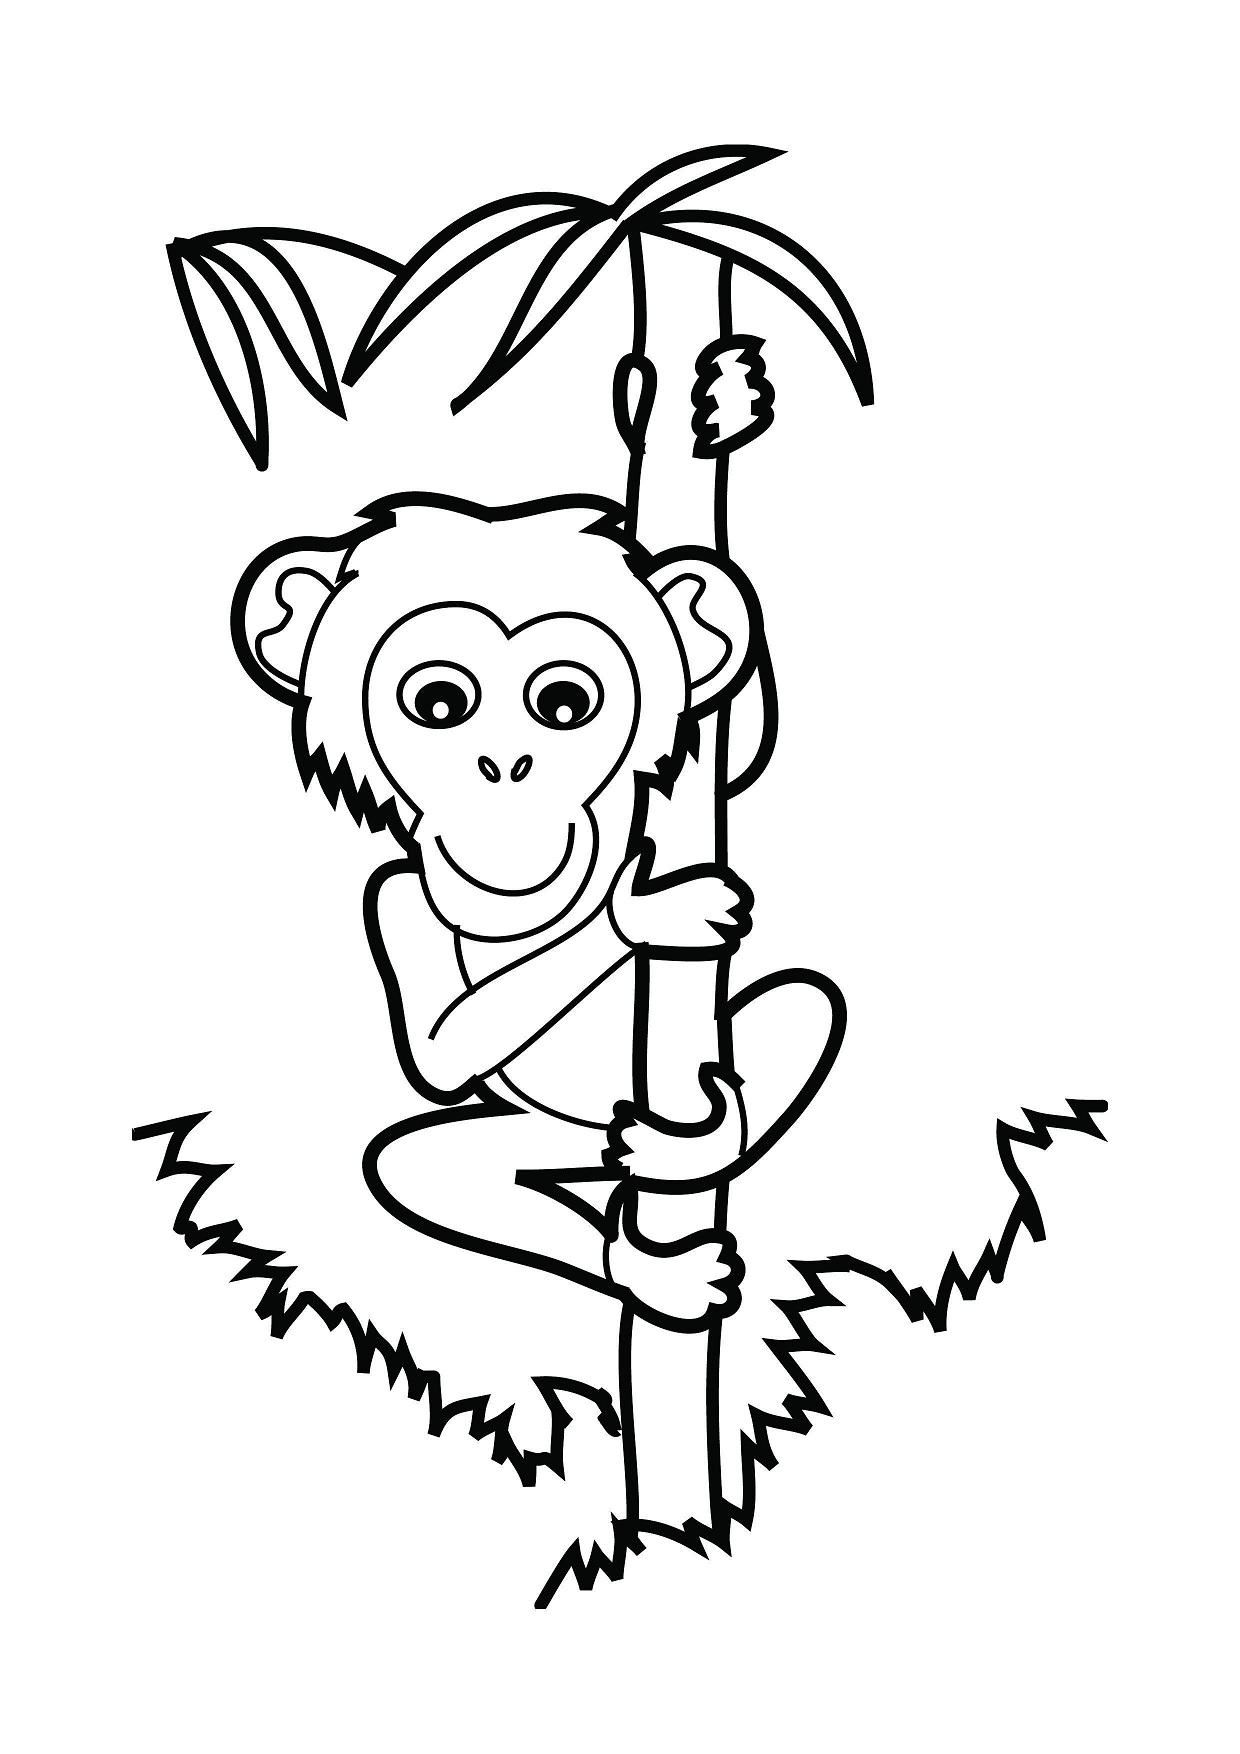 Download Monkey On Bamboo Tree Coloring Page - Free Printable ...